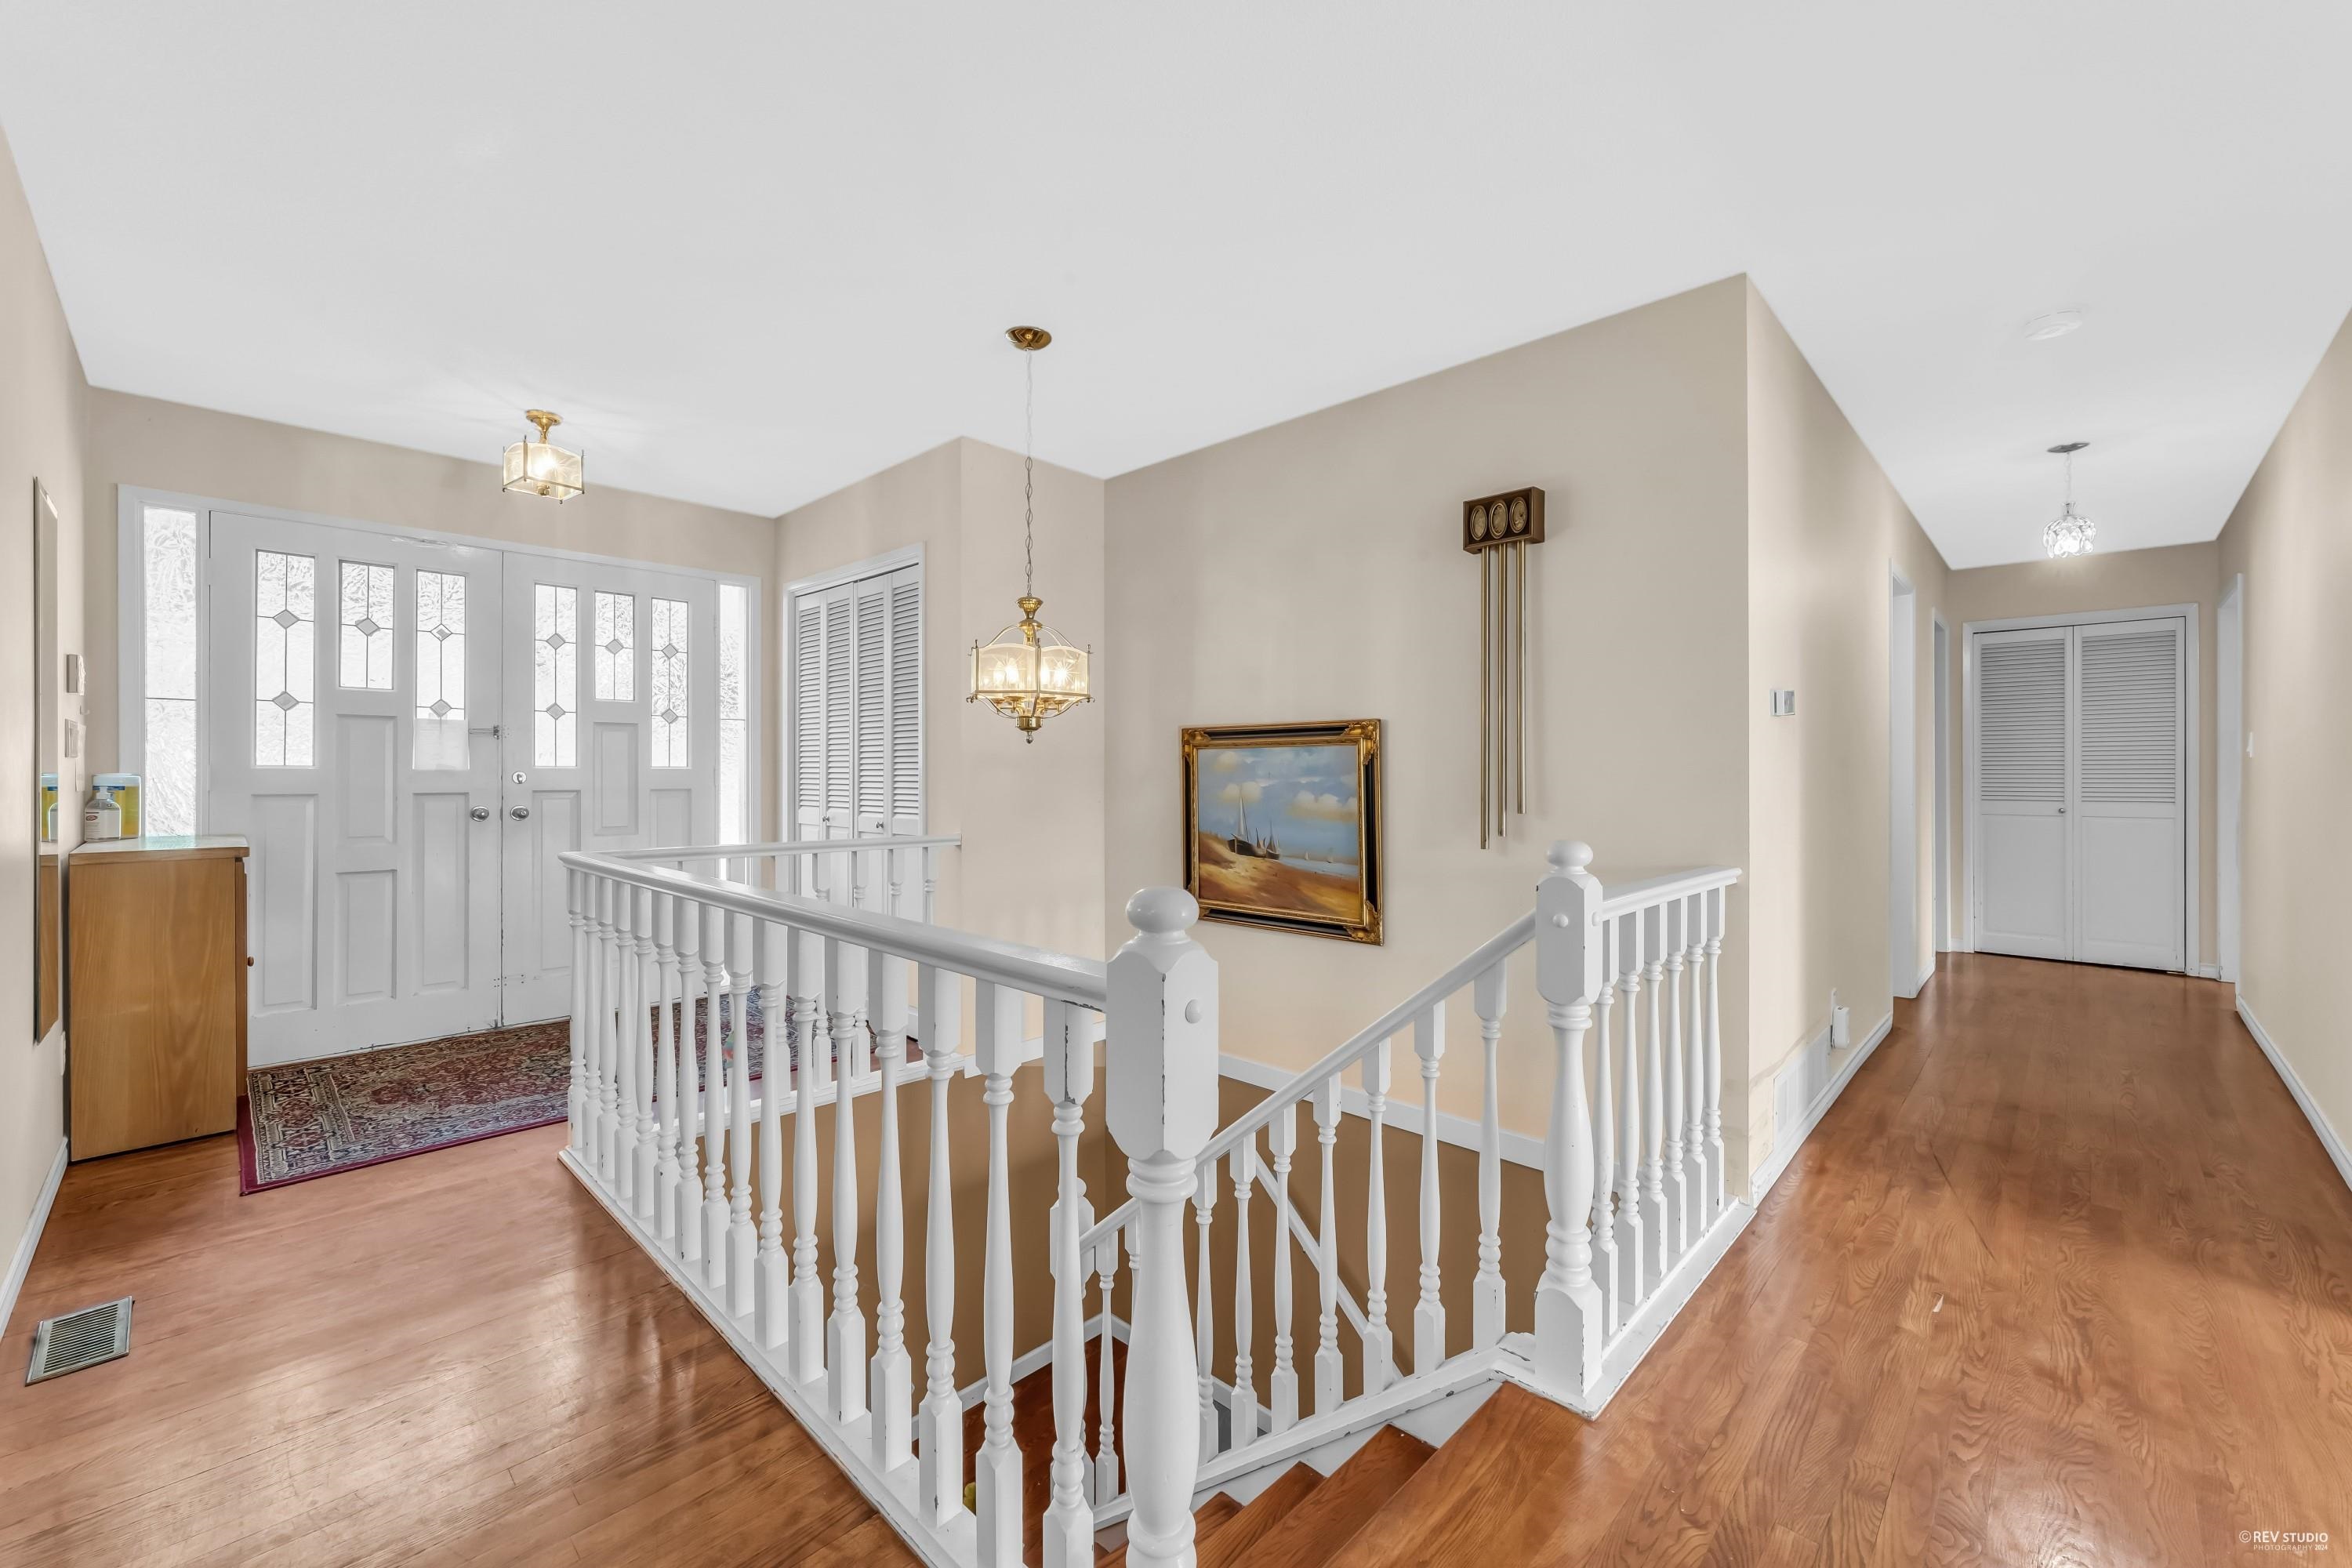 Listing image of 1181 CHARTWELL DRIVE